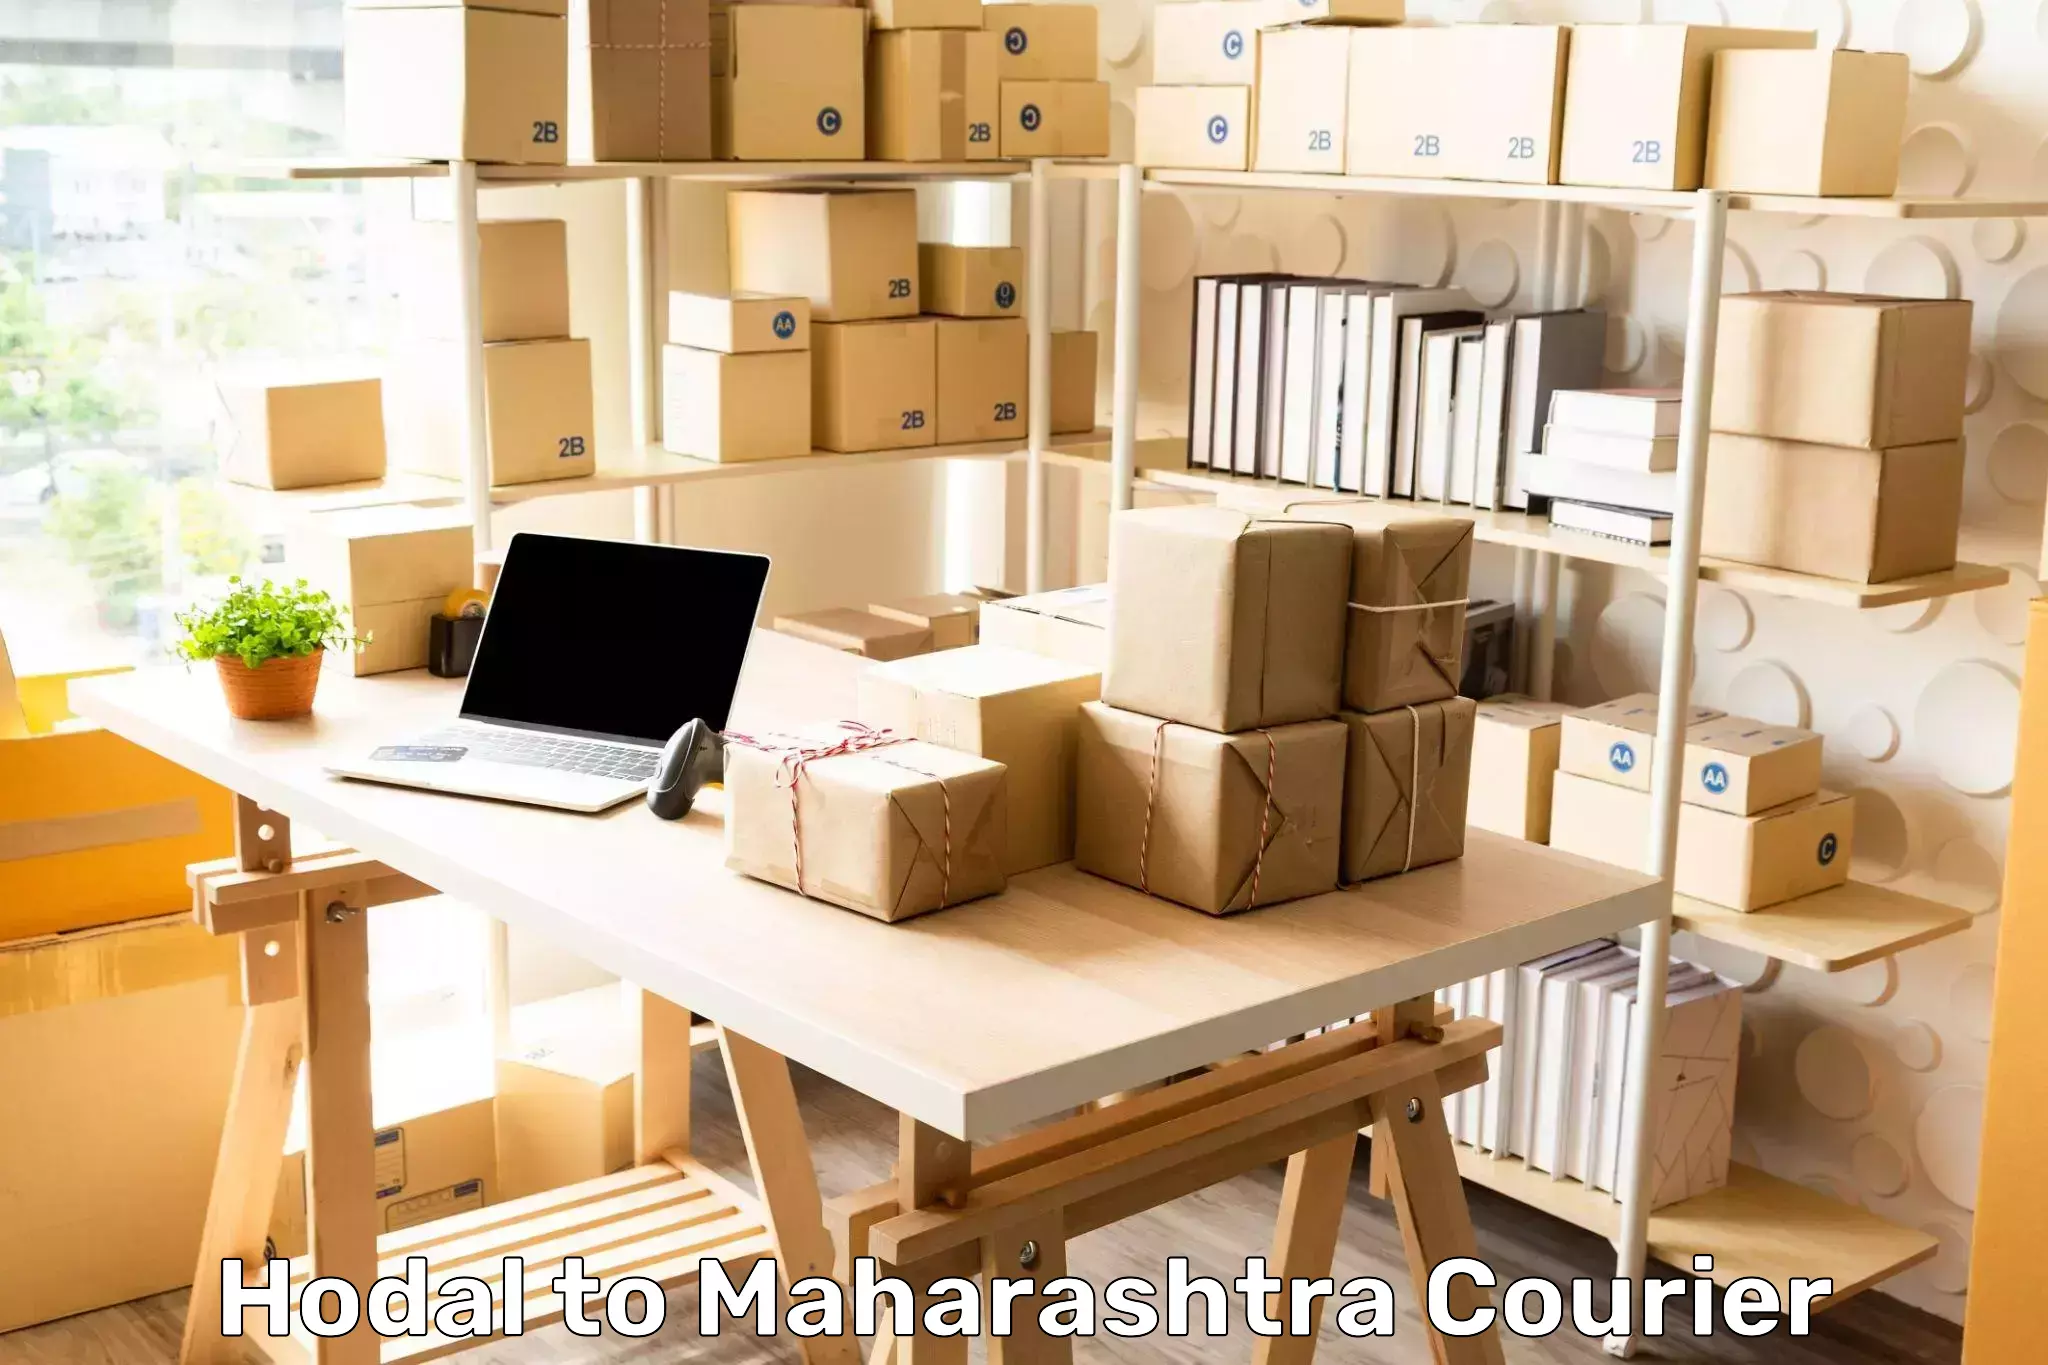 Postal and courier services Hodal to Mahabaleshwar